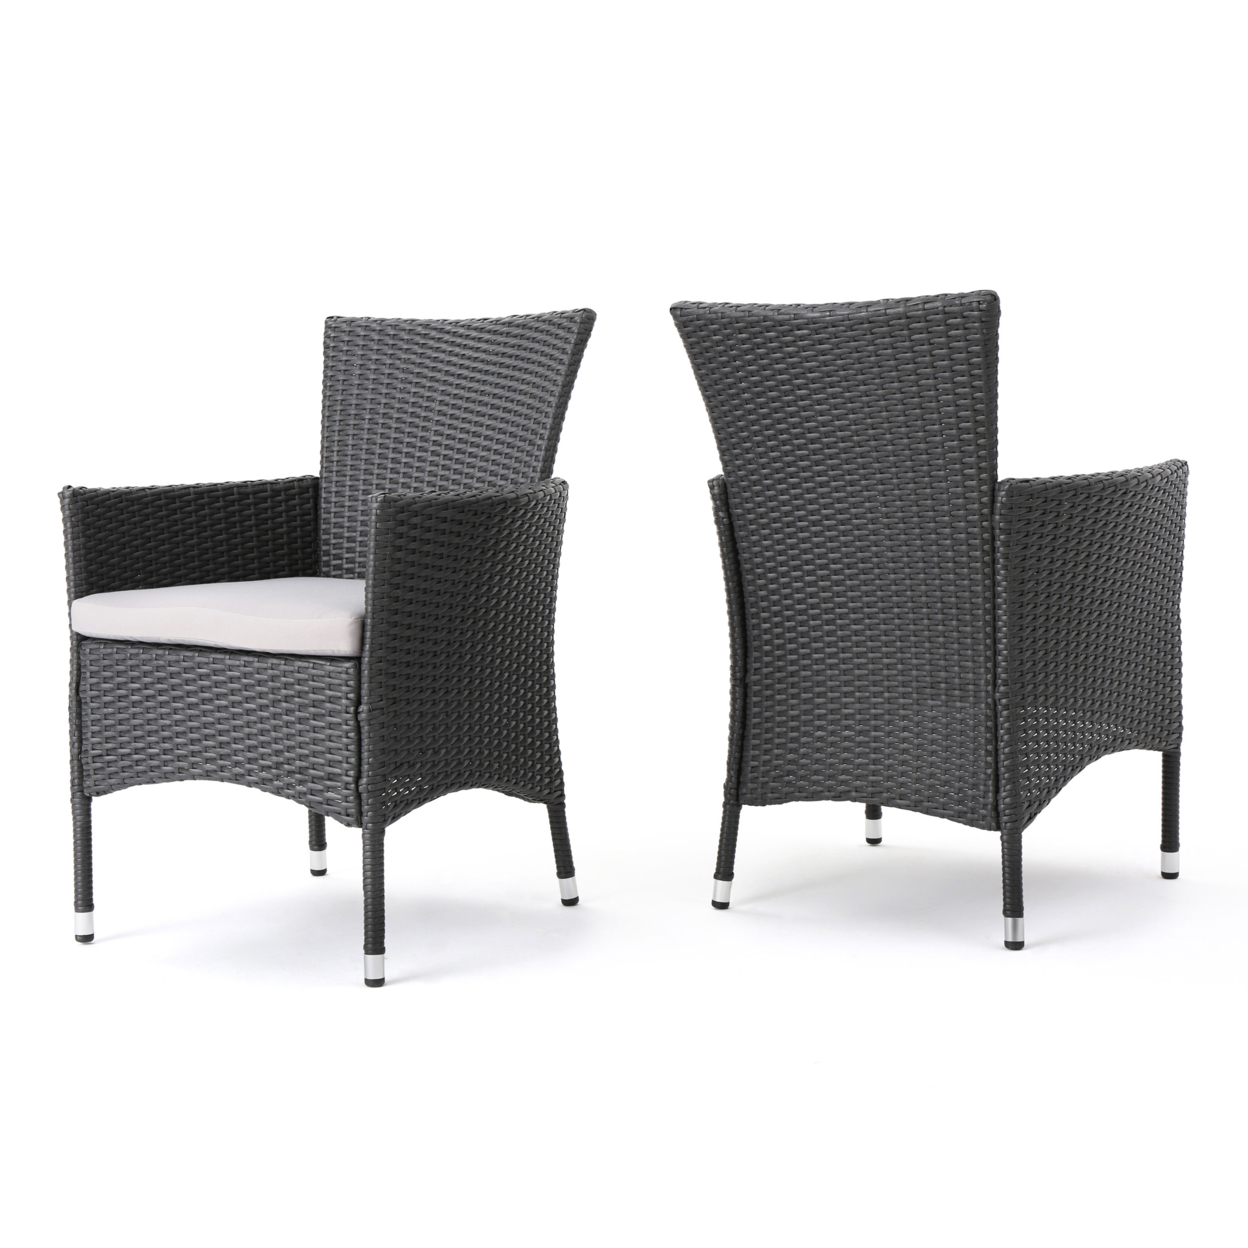 Brascha Contemporary Outdoor PE Wicker Dining Chairs With Cushions (Set Of 2)